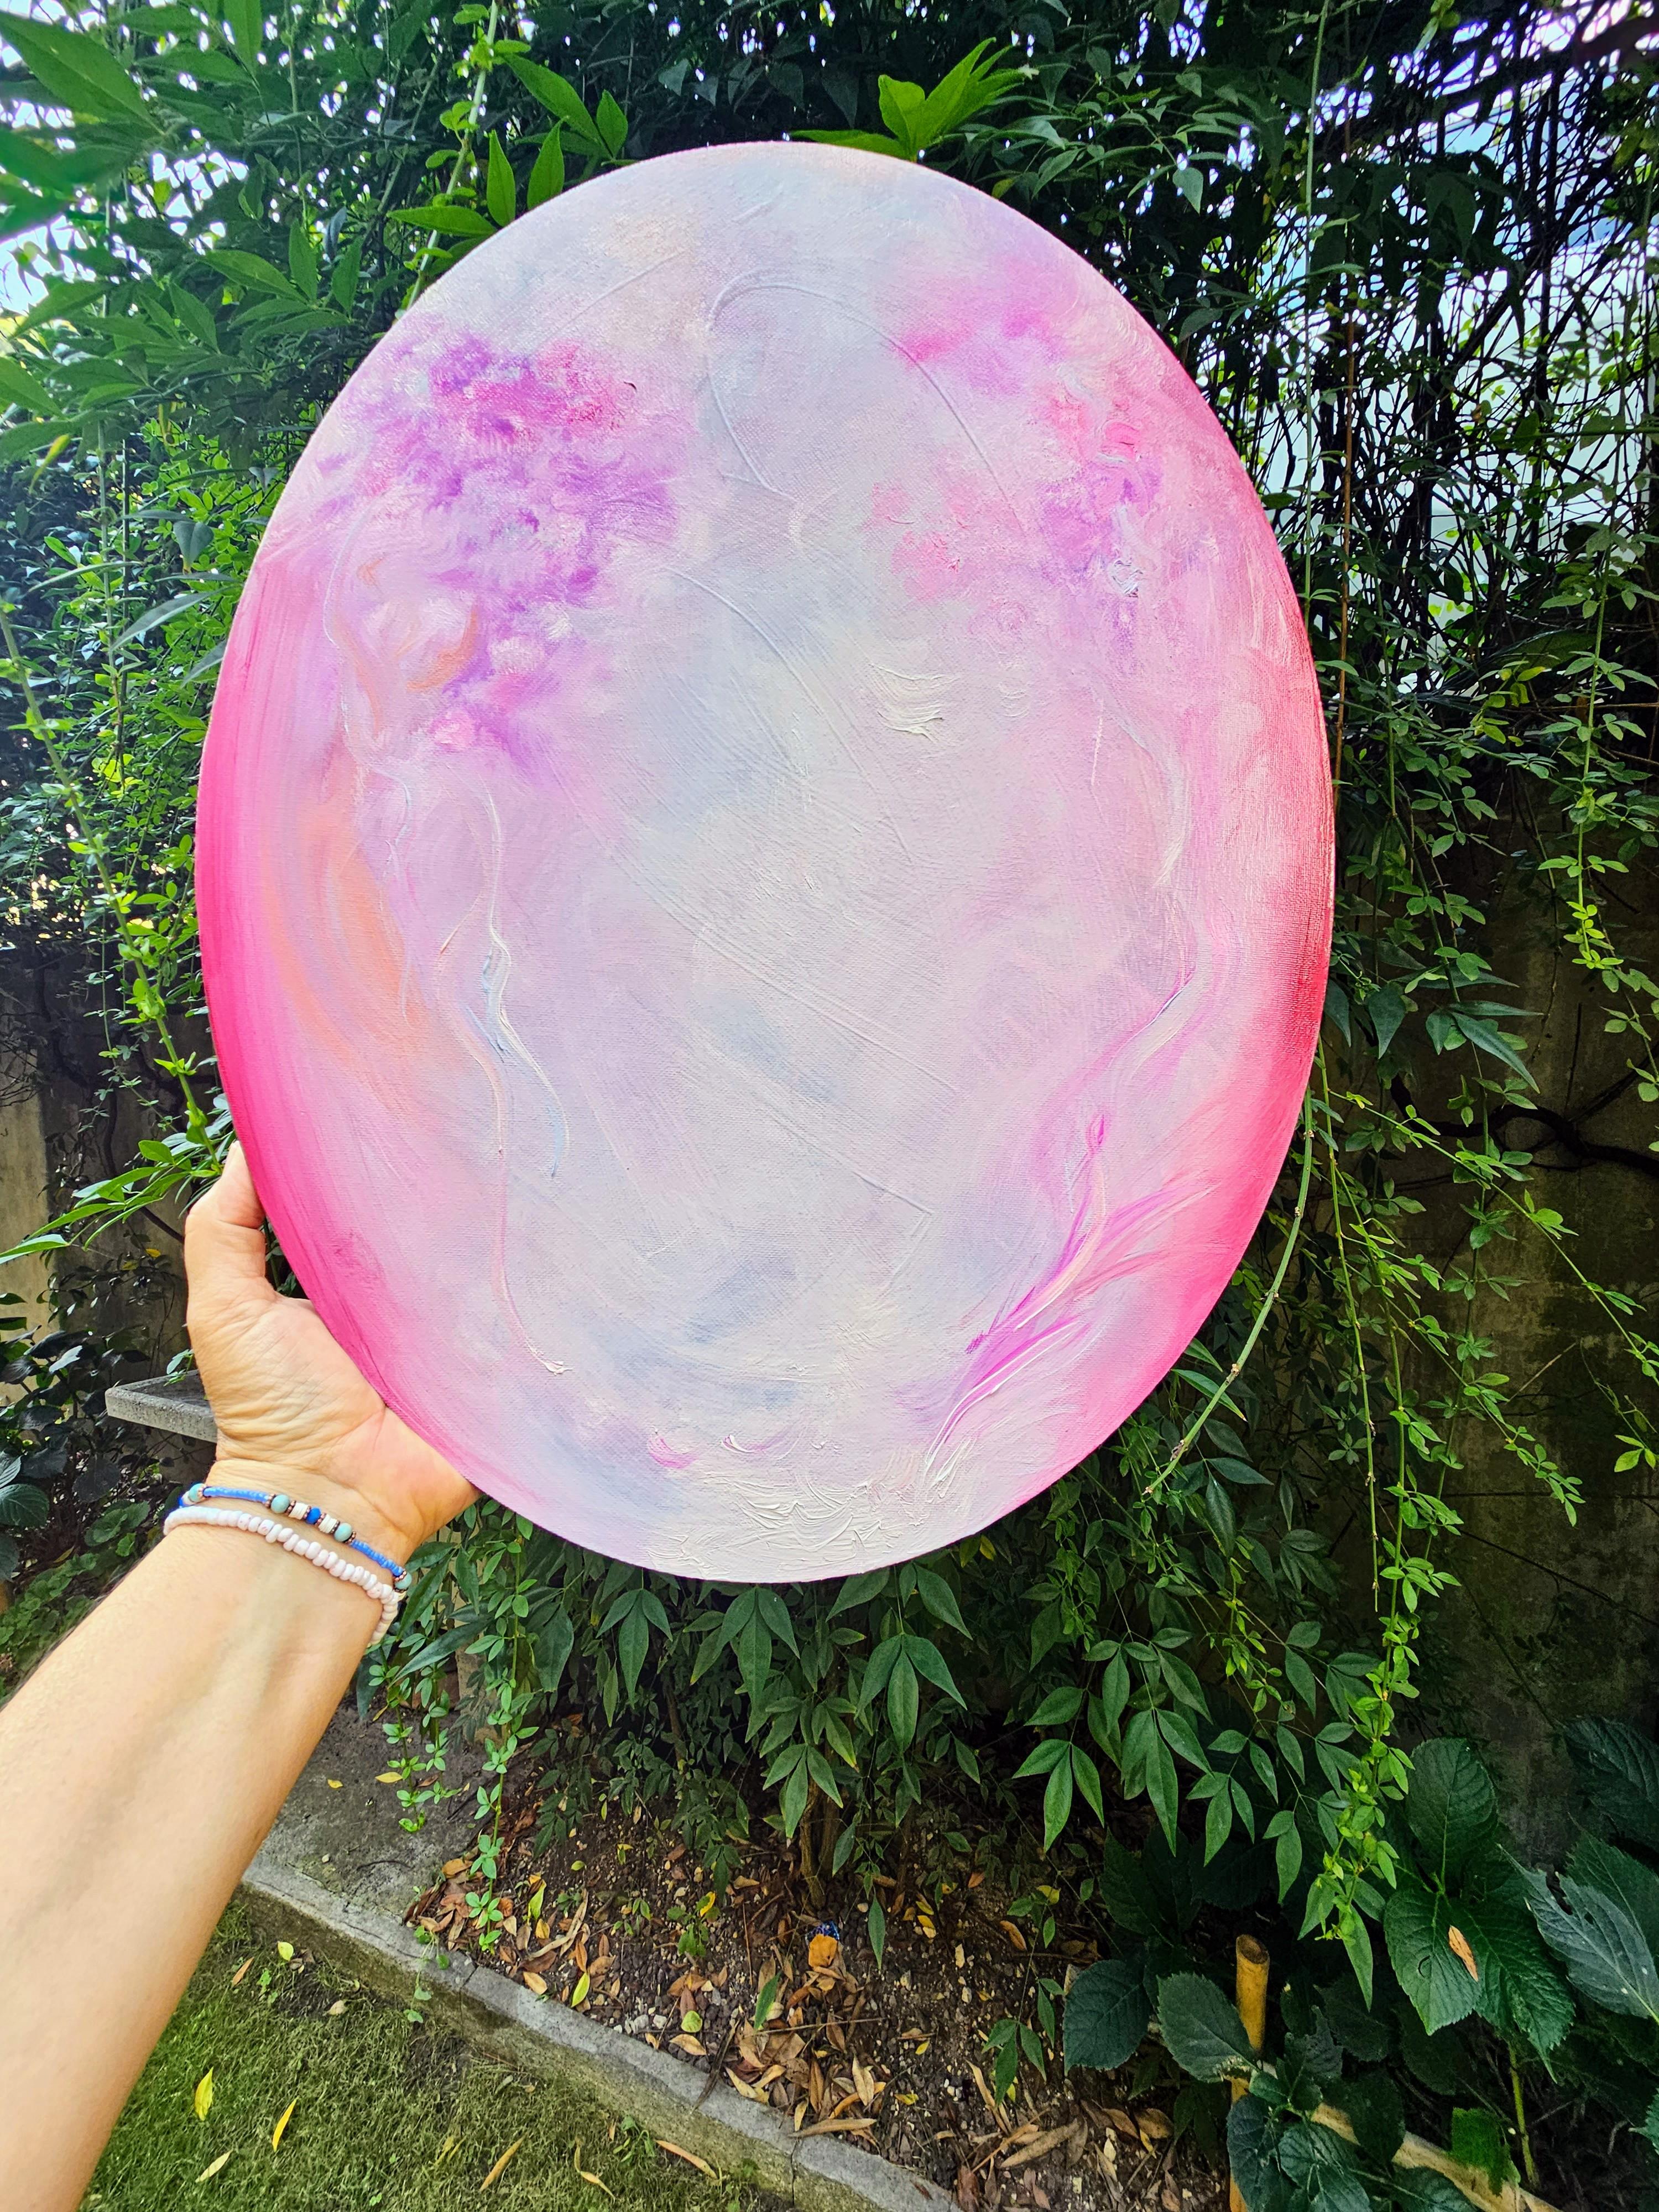 I fell in love - Pink oval abstract painting - Painting by Jennifer L. Baker